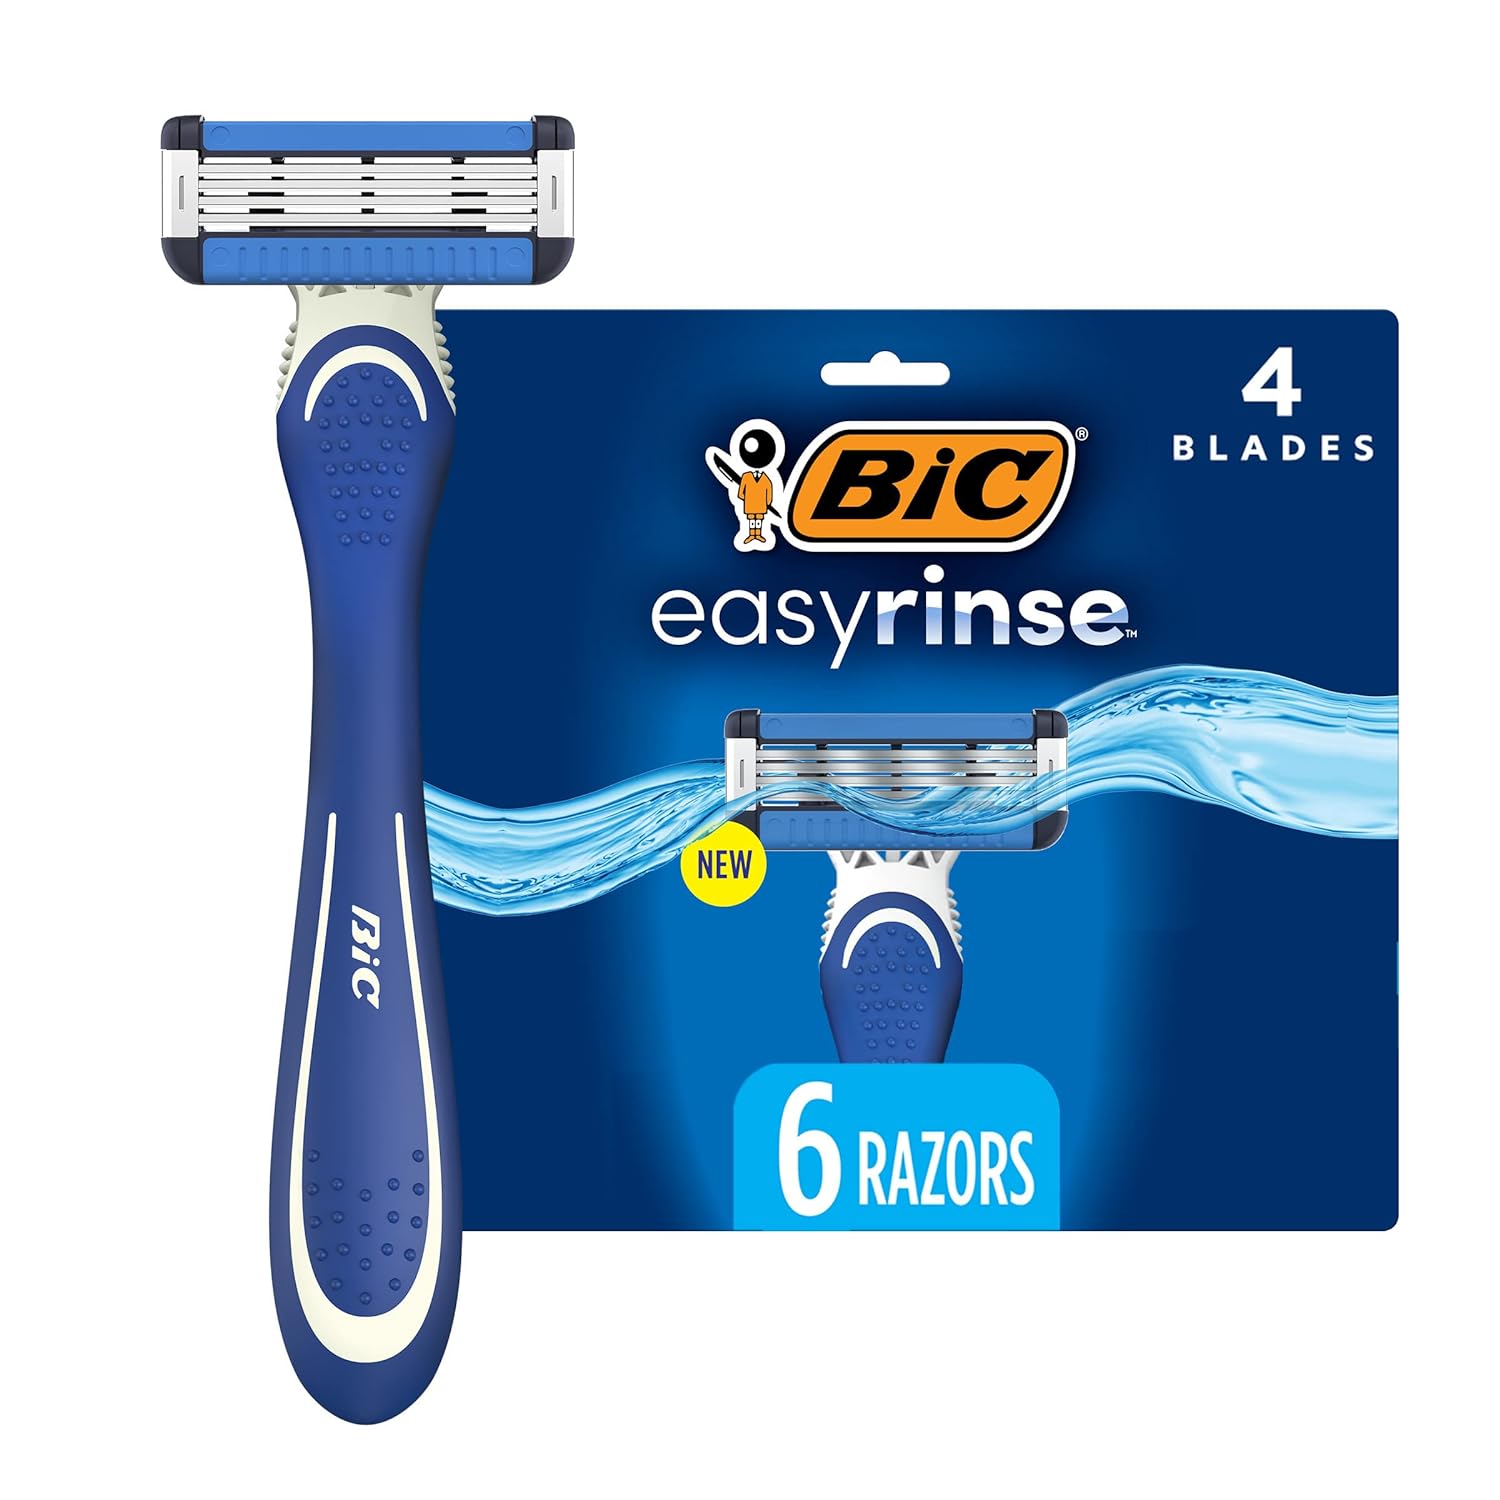 BIC EasyRinse Anti-Clogging Men' Disposable Razors for a Smoother Shave With Less Irritation*, Easy Rinse Shaving Razors With 4 Blades, 6 Count